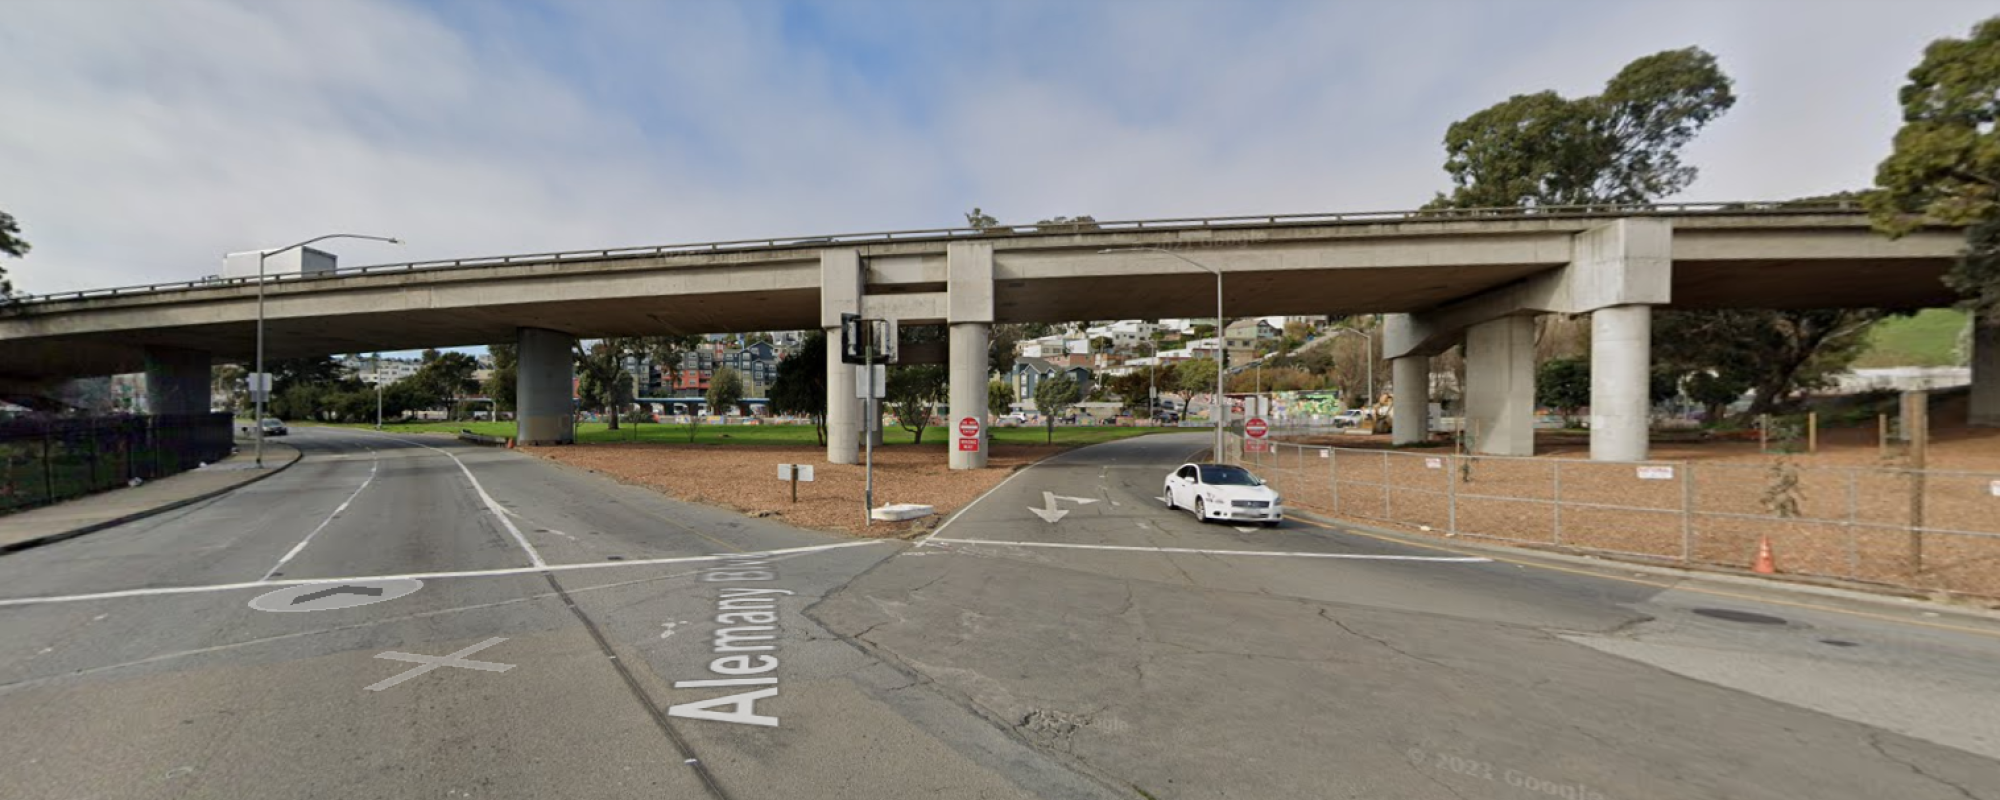 Current Street View of Alemany Interchange